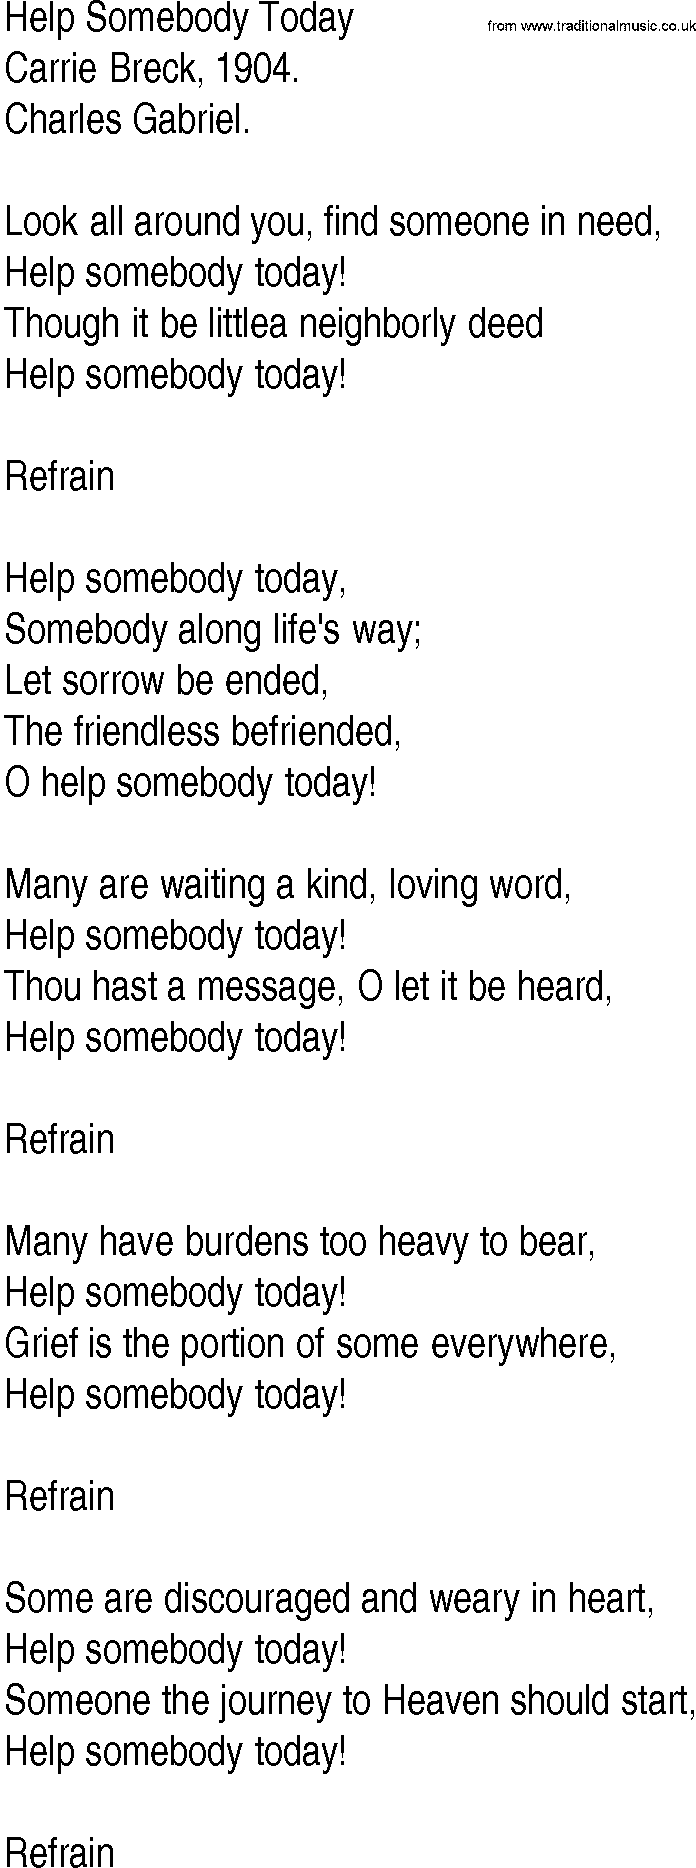 Hymn and Gospel Song: Help Somebody Today by Carrie Breck lyrics